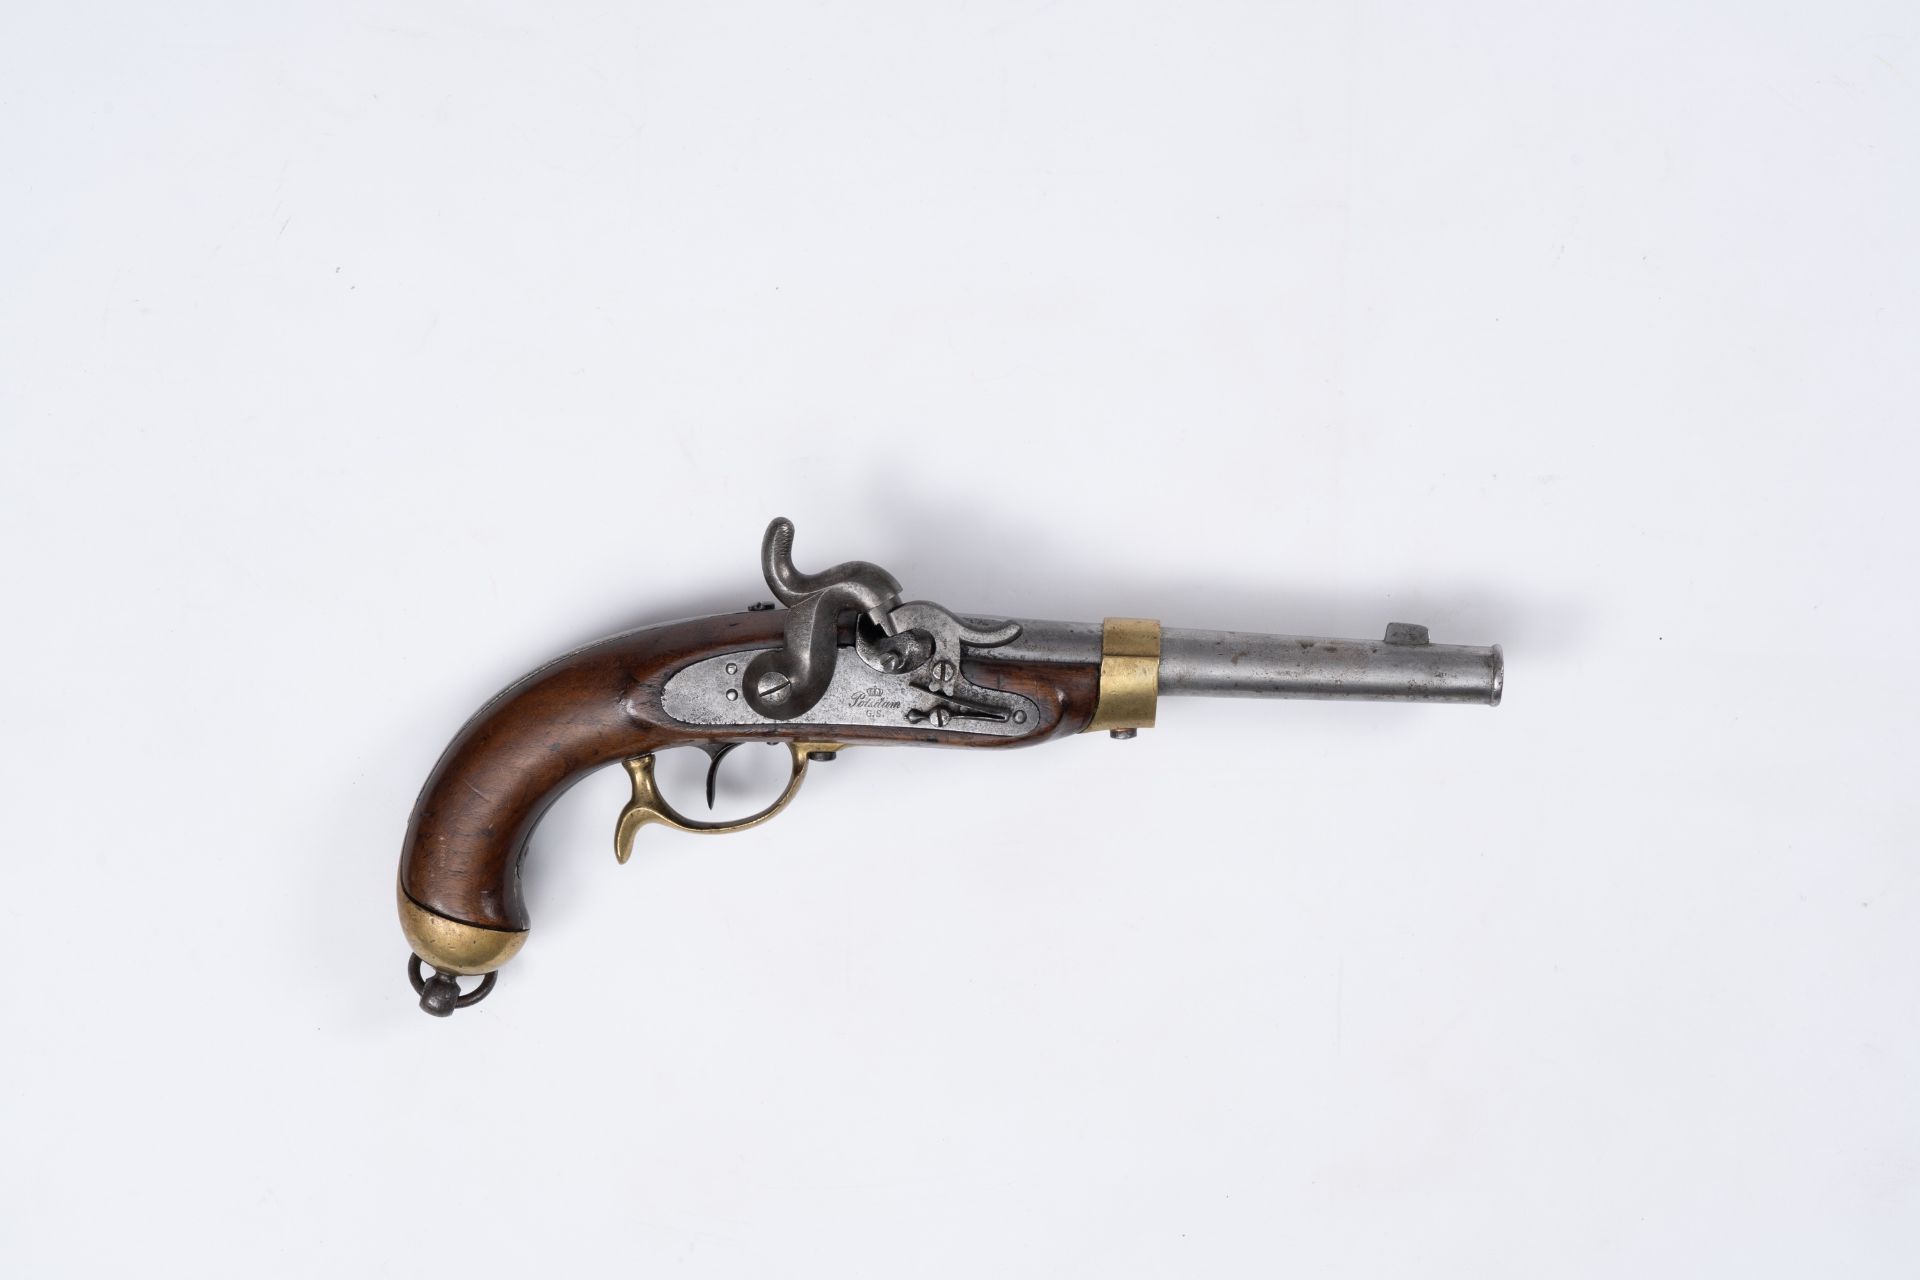 A German cavalry percussion pistol with extra safety system on the lock, monogram G.S., Potsdam, dat